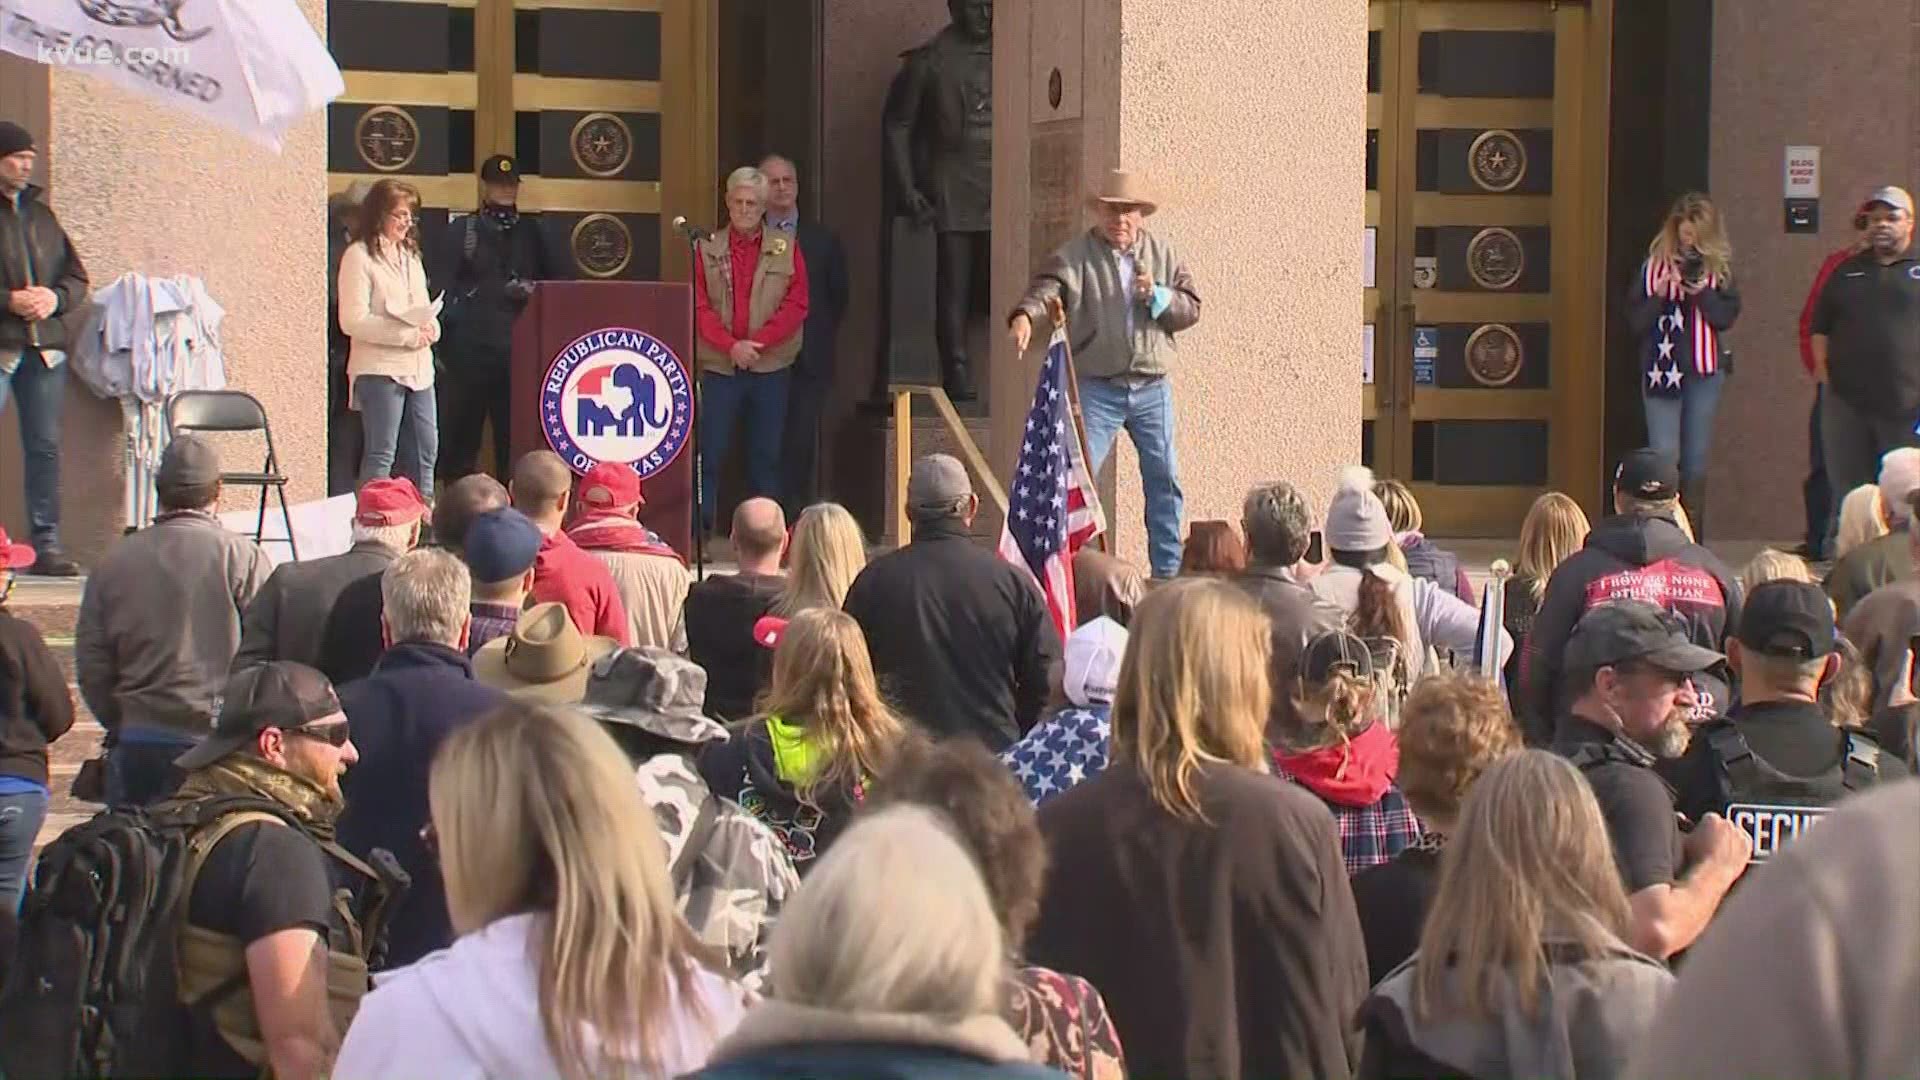 The Texas GOP held a rally at the Texas Capitol ahead of the legislative session. The party focused on Republican issues for the upcoming session.